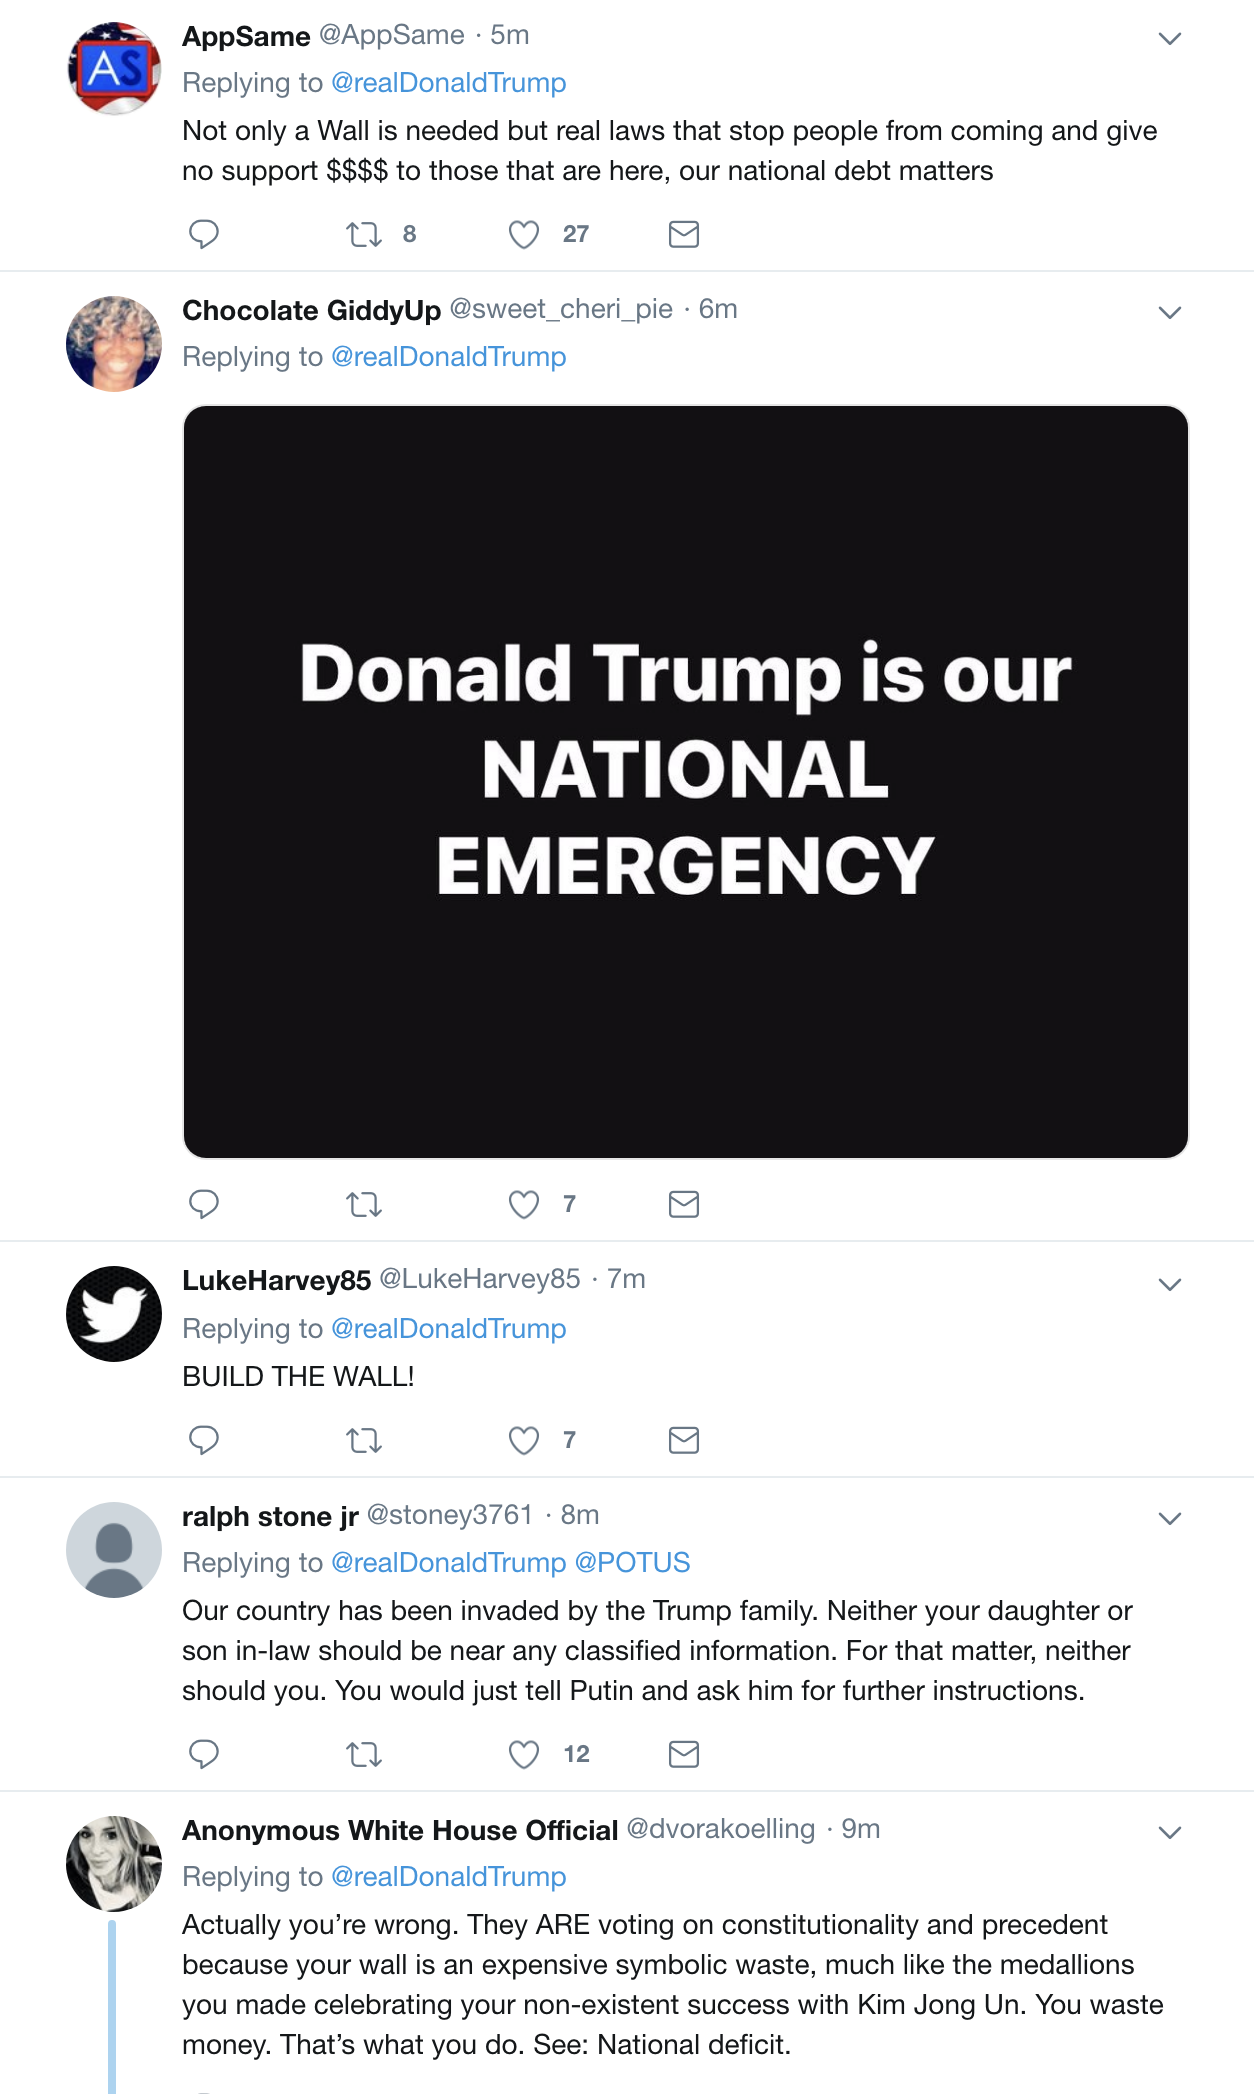 Screen-Shot-2019-03-06-at-12.08.20-PM Trump Snaps & Has Deranged Wednesday Afternoon Mental Collapse (IMAGES) Corruption Crime Domestic Policy Donald Trump Politics Social Media Top Stories 